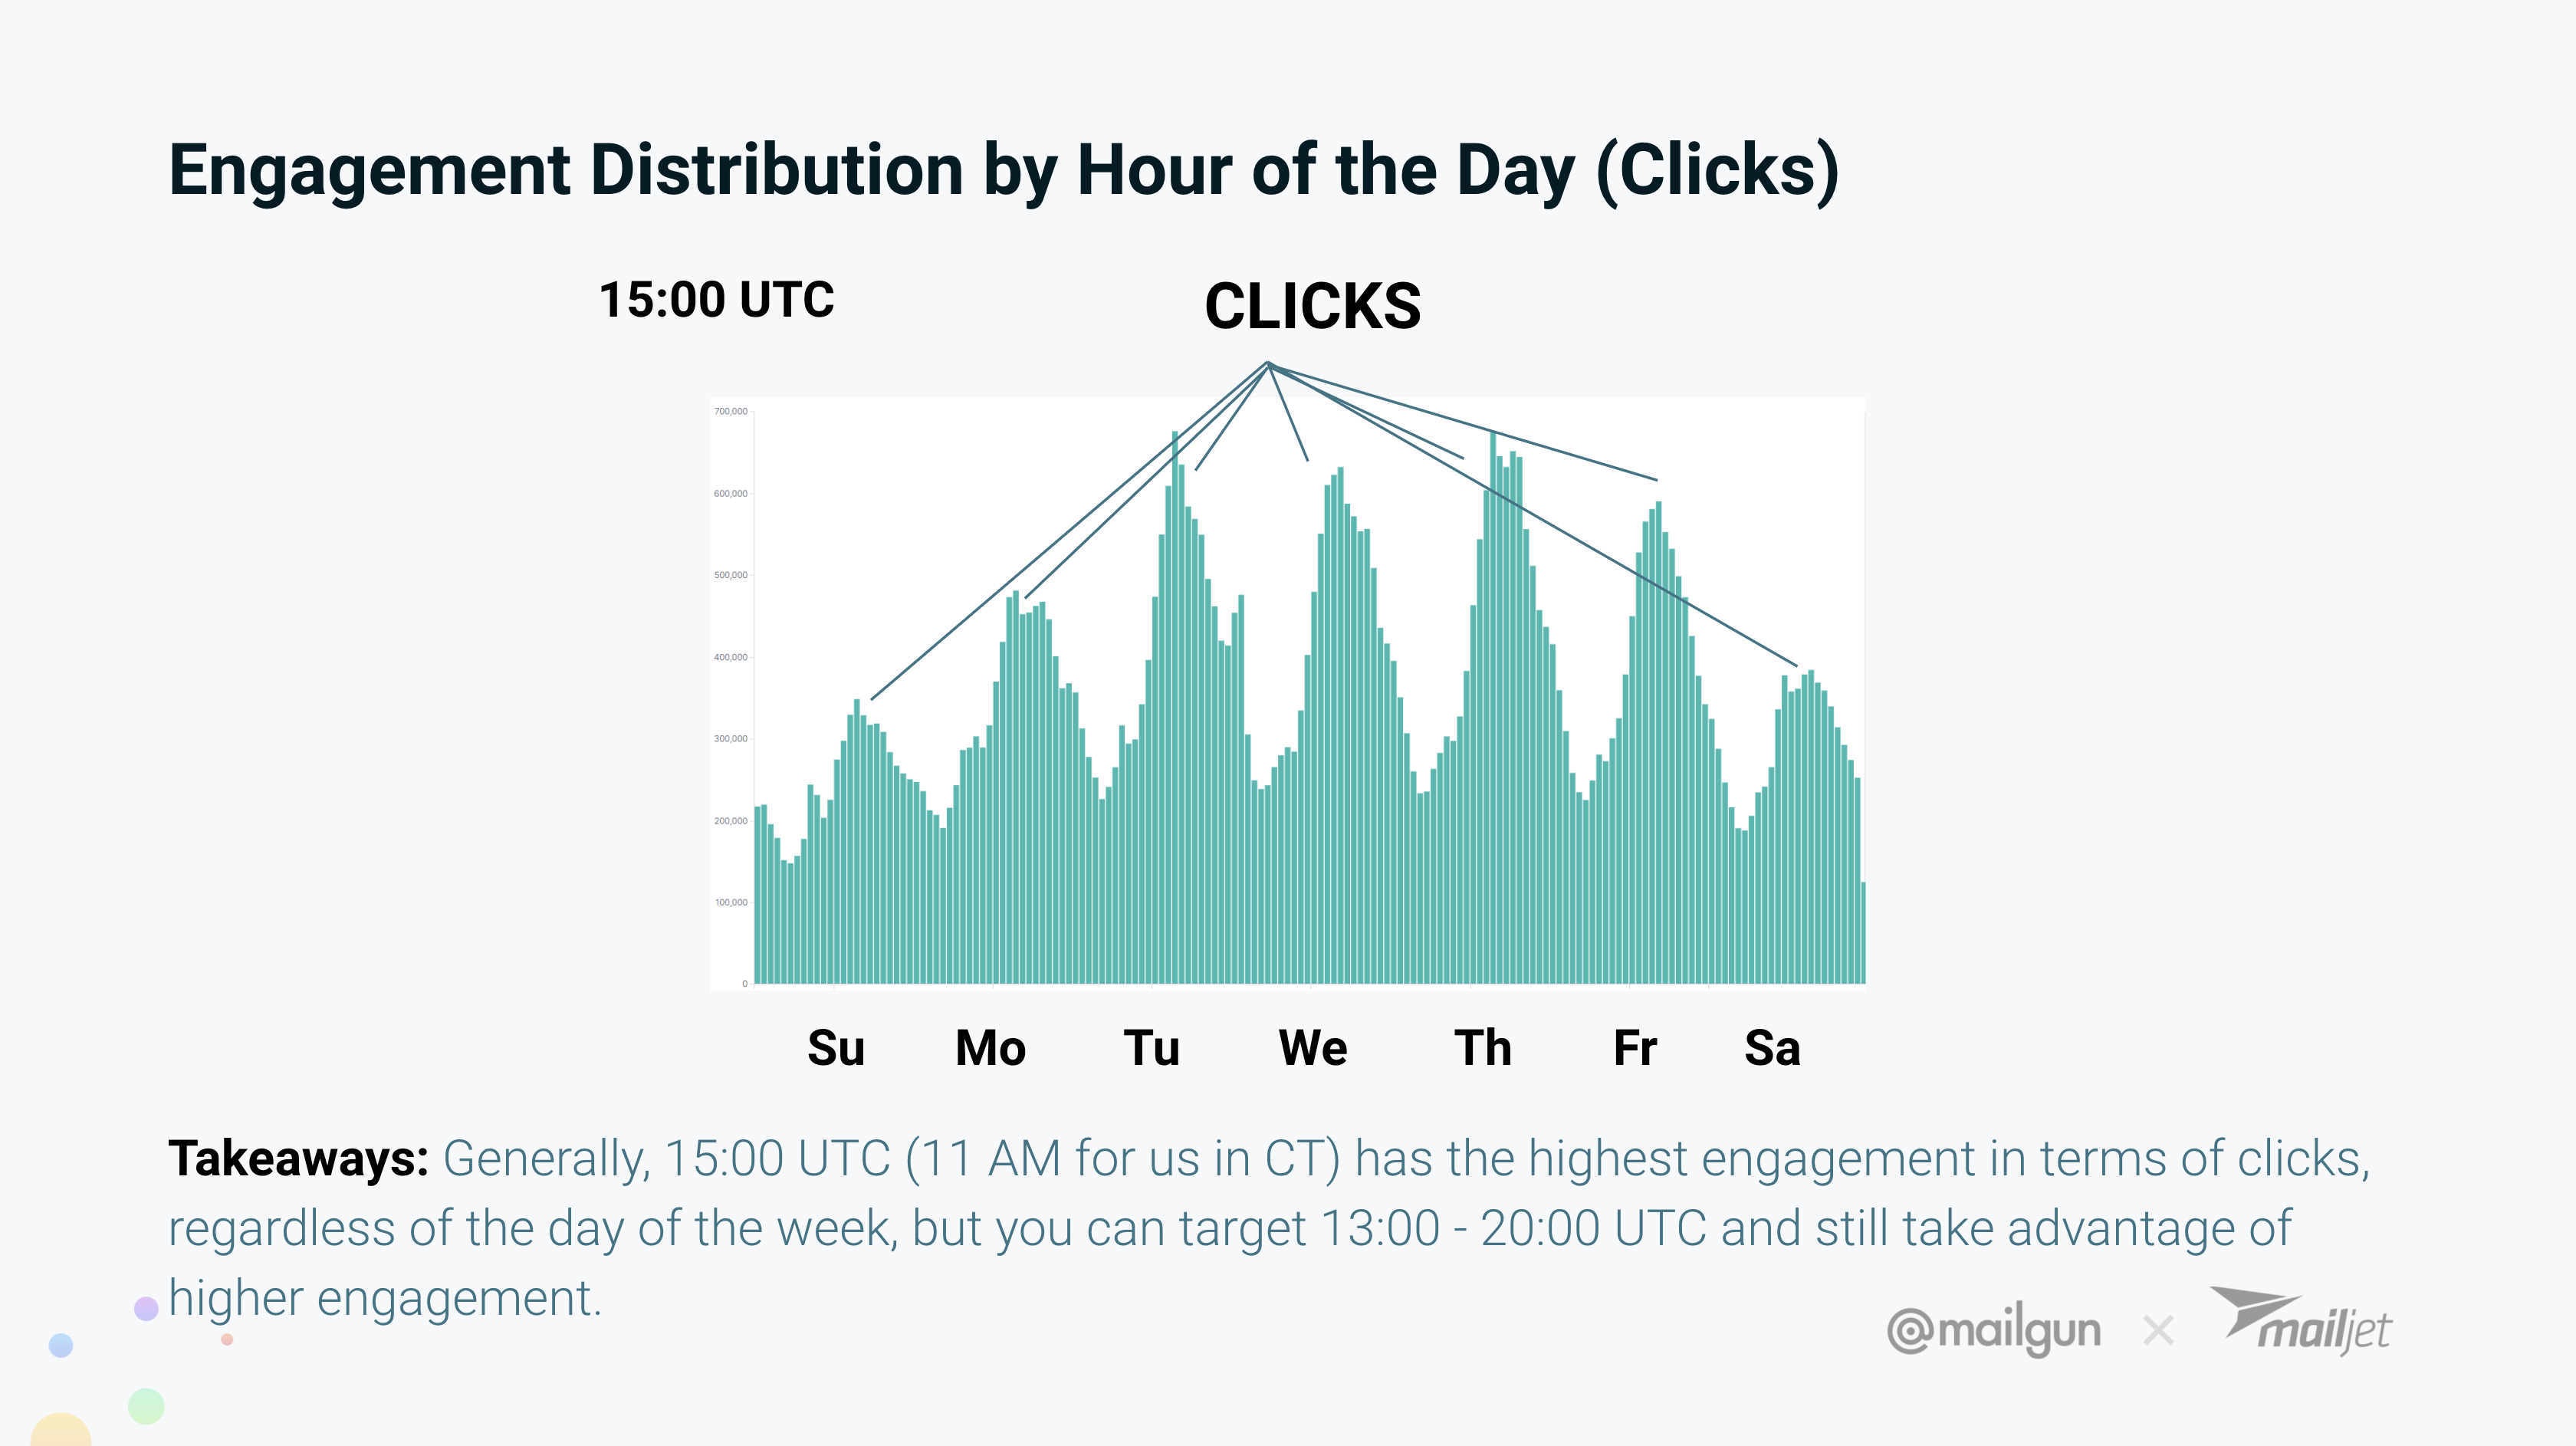 Engagement graph showing clicks throughout the day